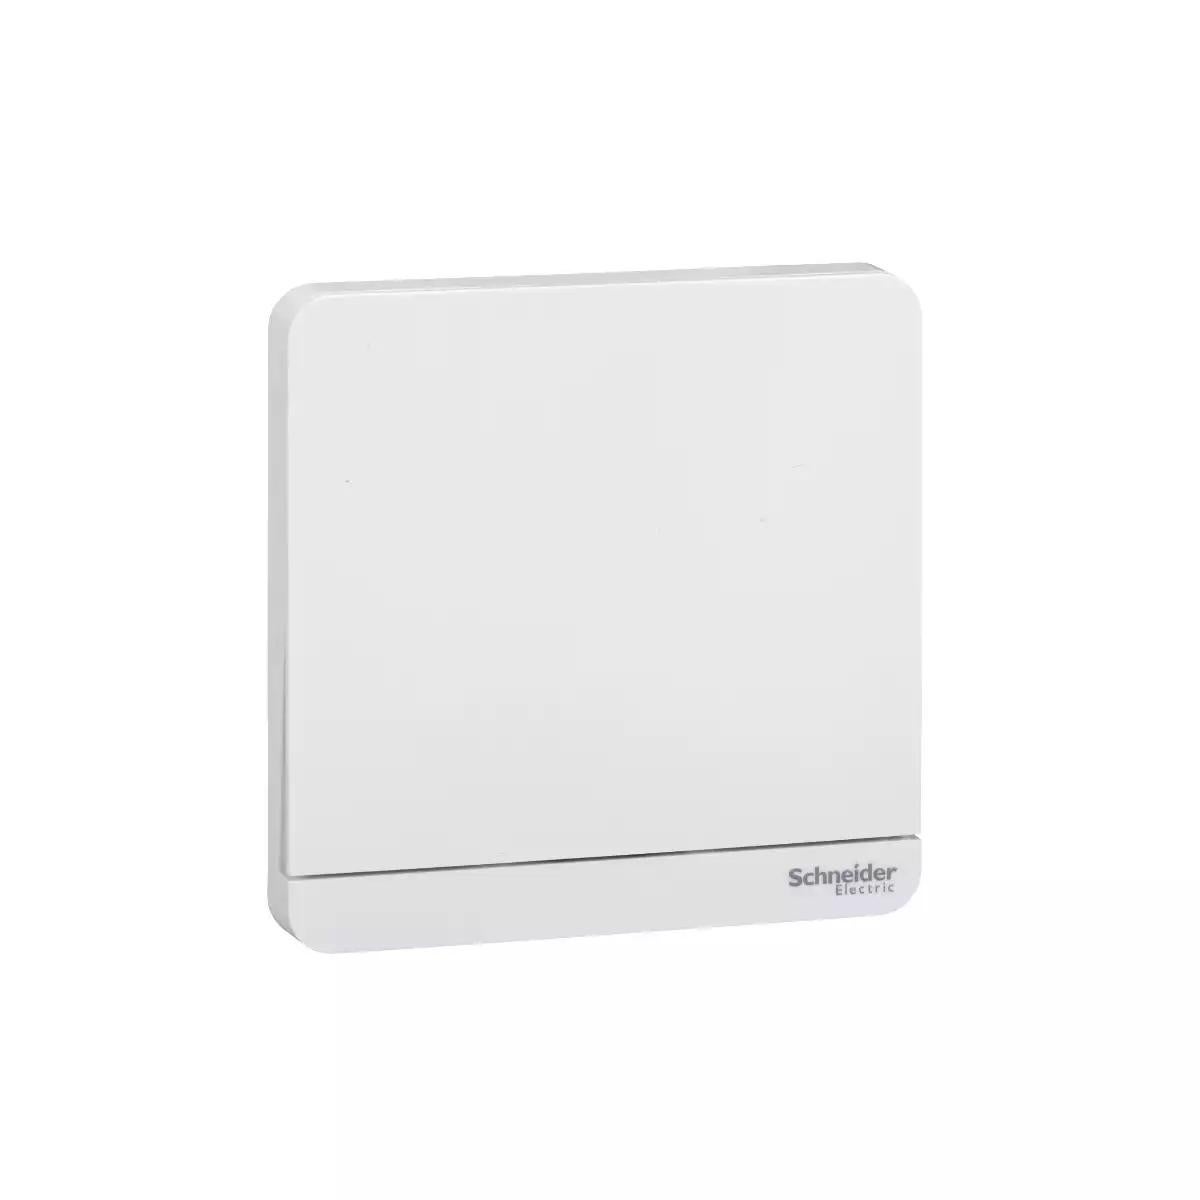 AvatarOn, cover plate for switch, White